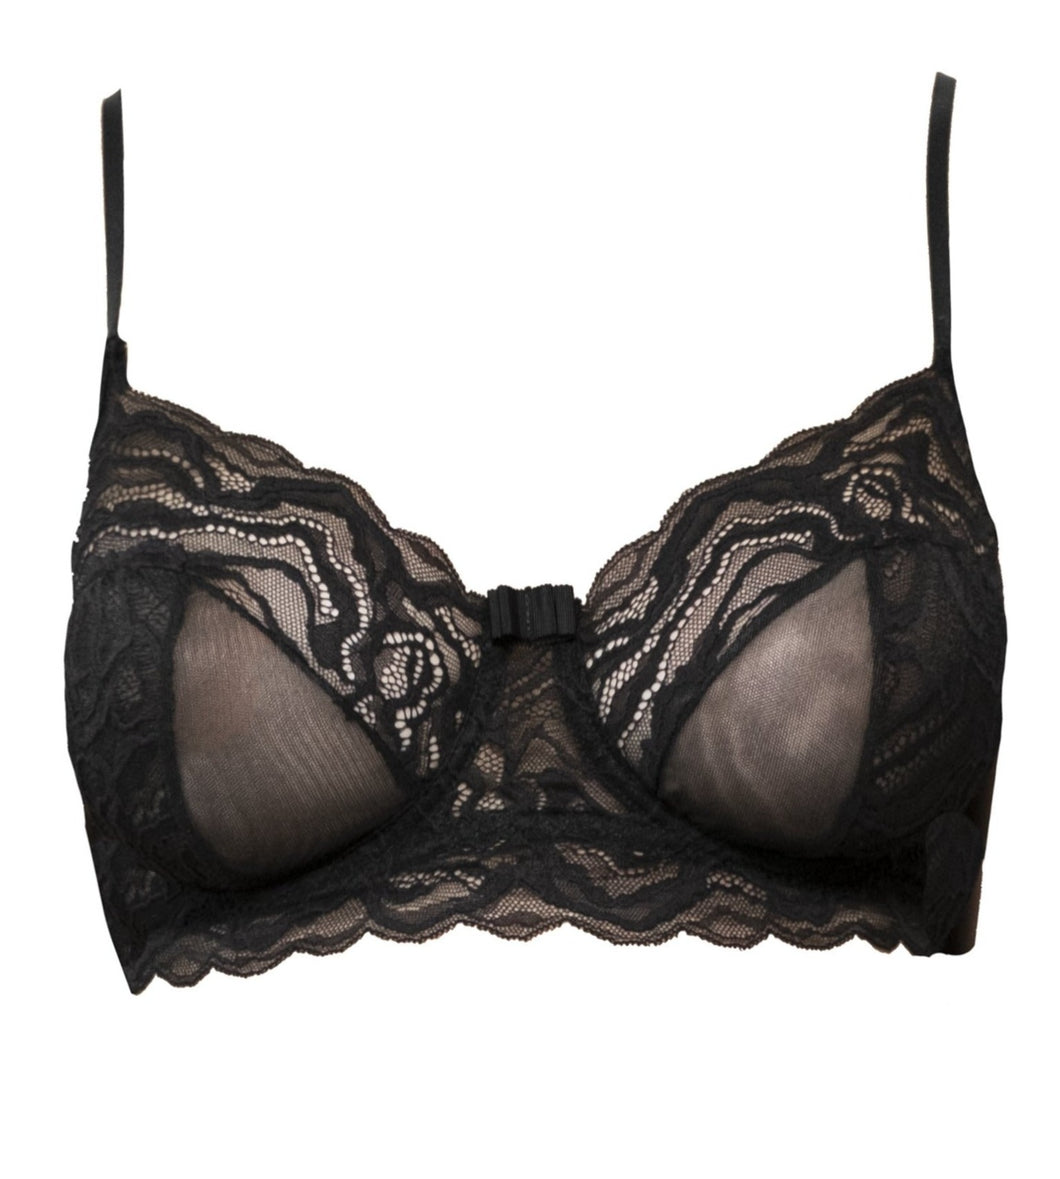 This classic everyday bra features underwire, sheer center panels with elastic-free lace edge. 